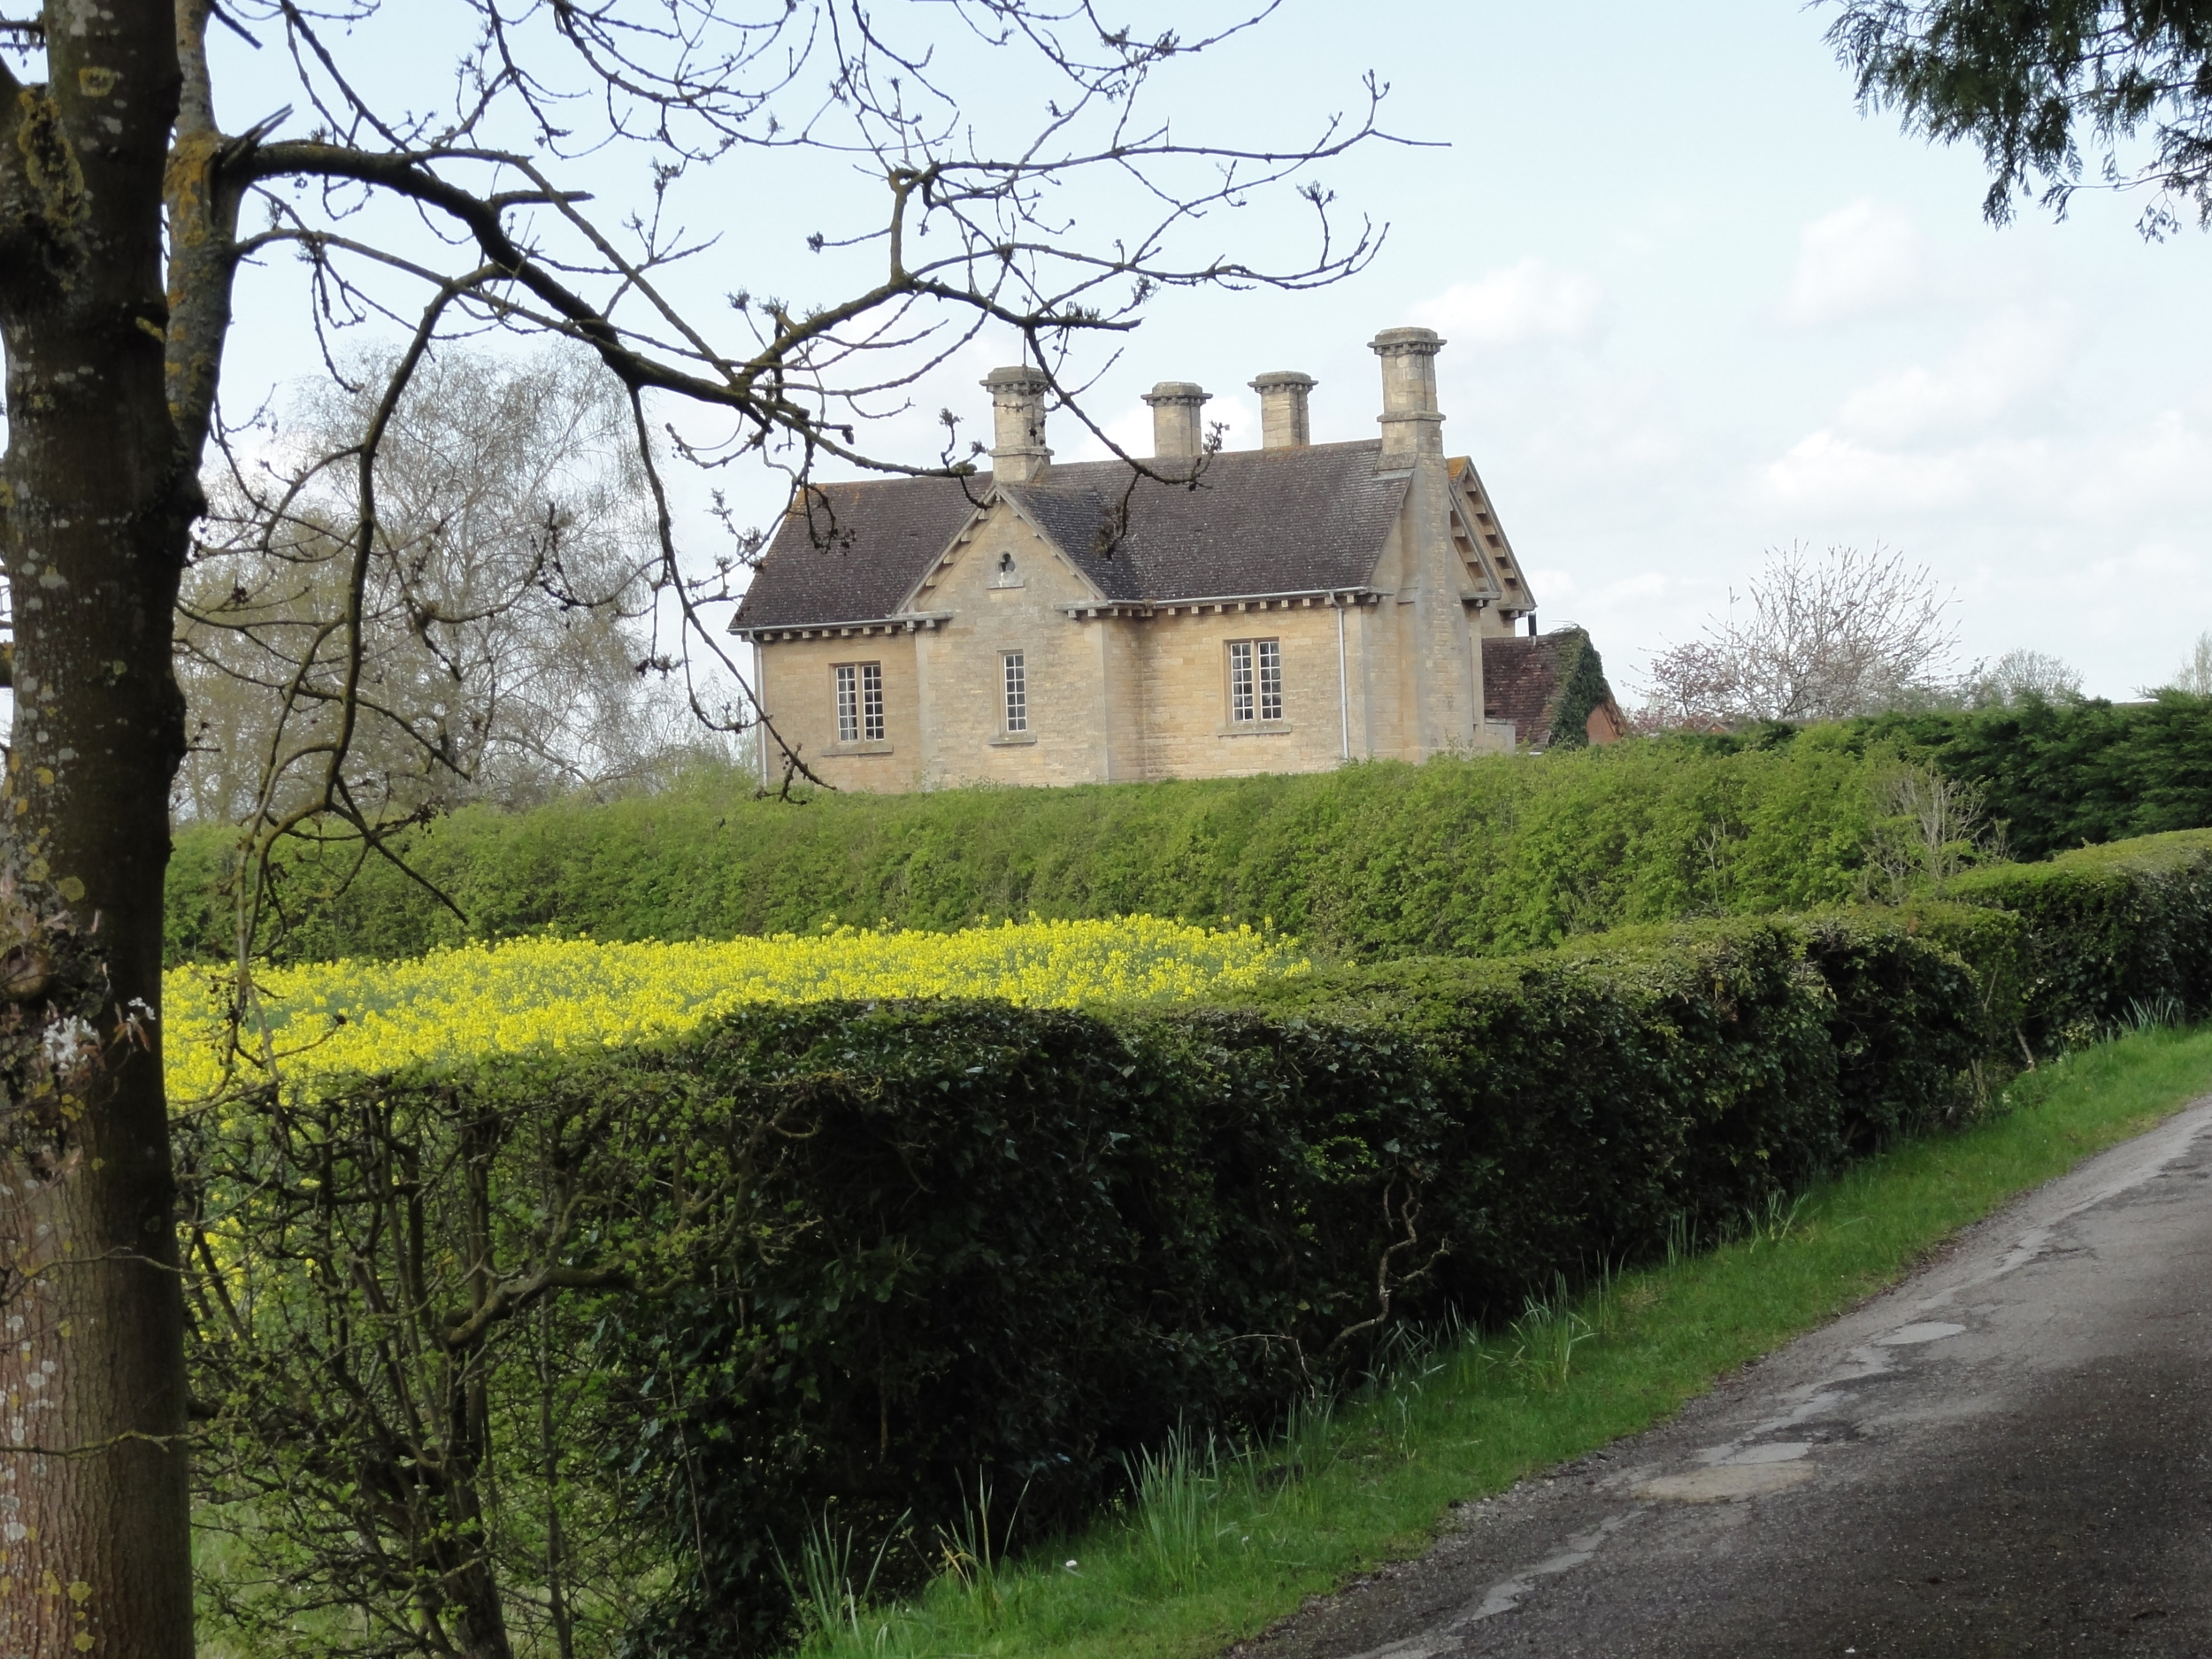 The Moretons Farmhouse viewed from the drive